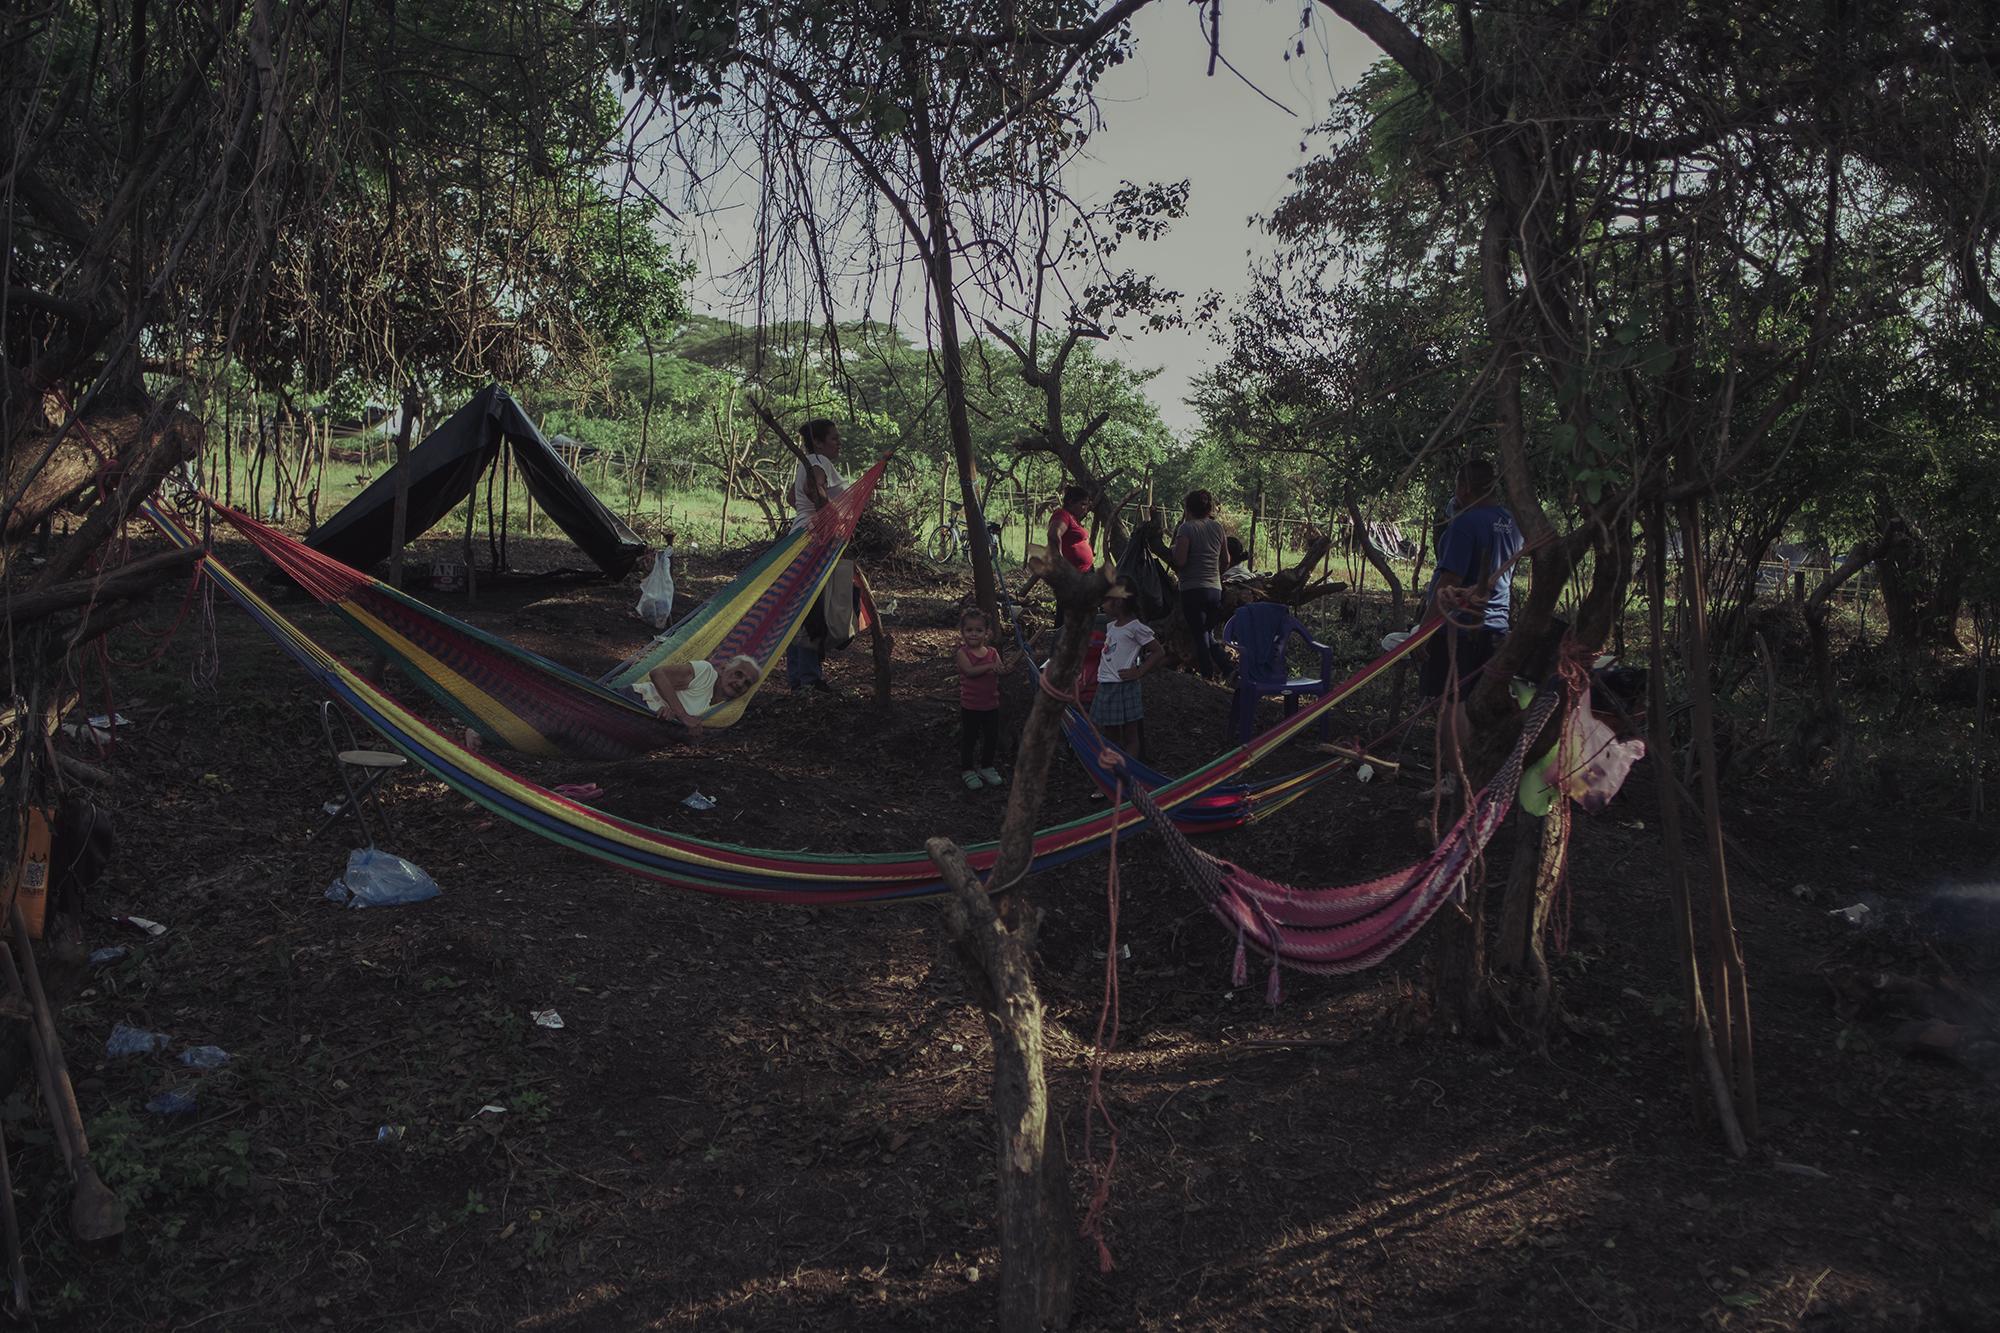 Some of the families who fled Urbina 2 have gradually set up camp on this section of land over the past month. Residents hope to establish a new settlement and, one day, own the land. 